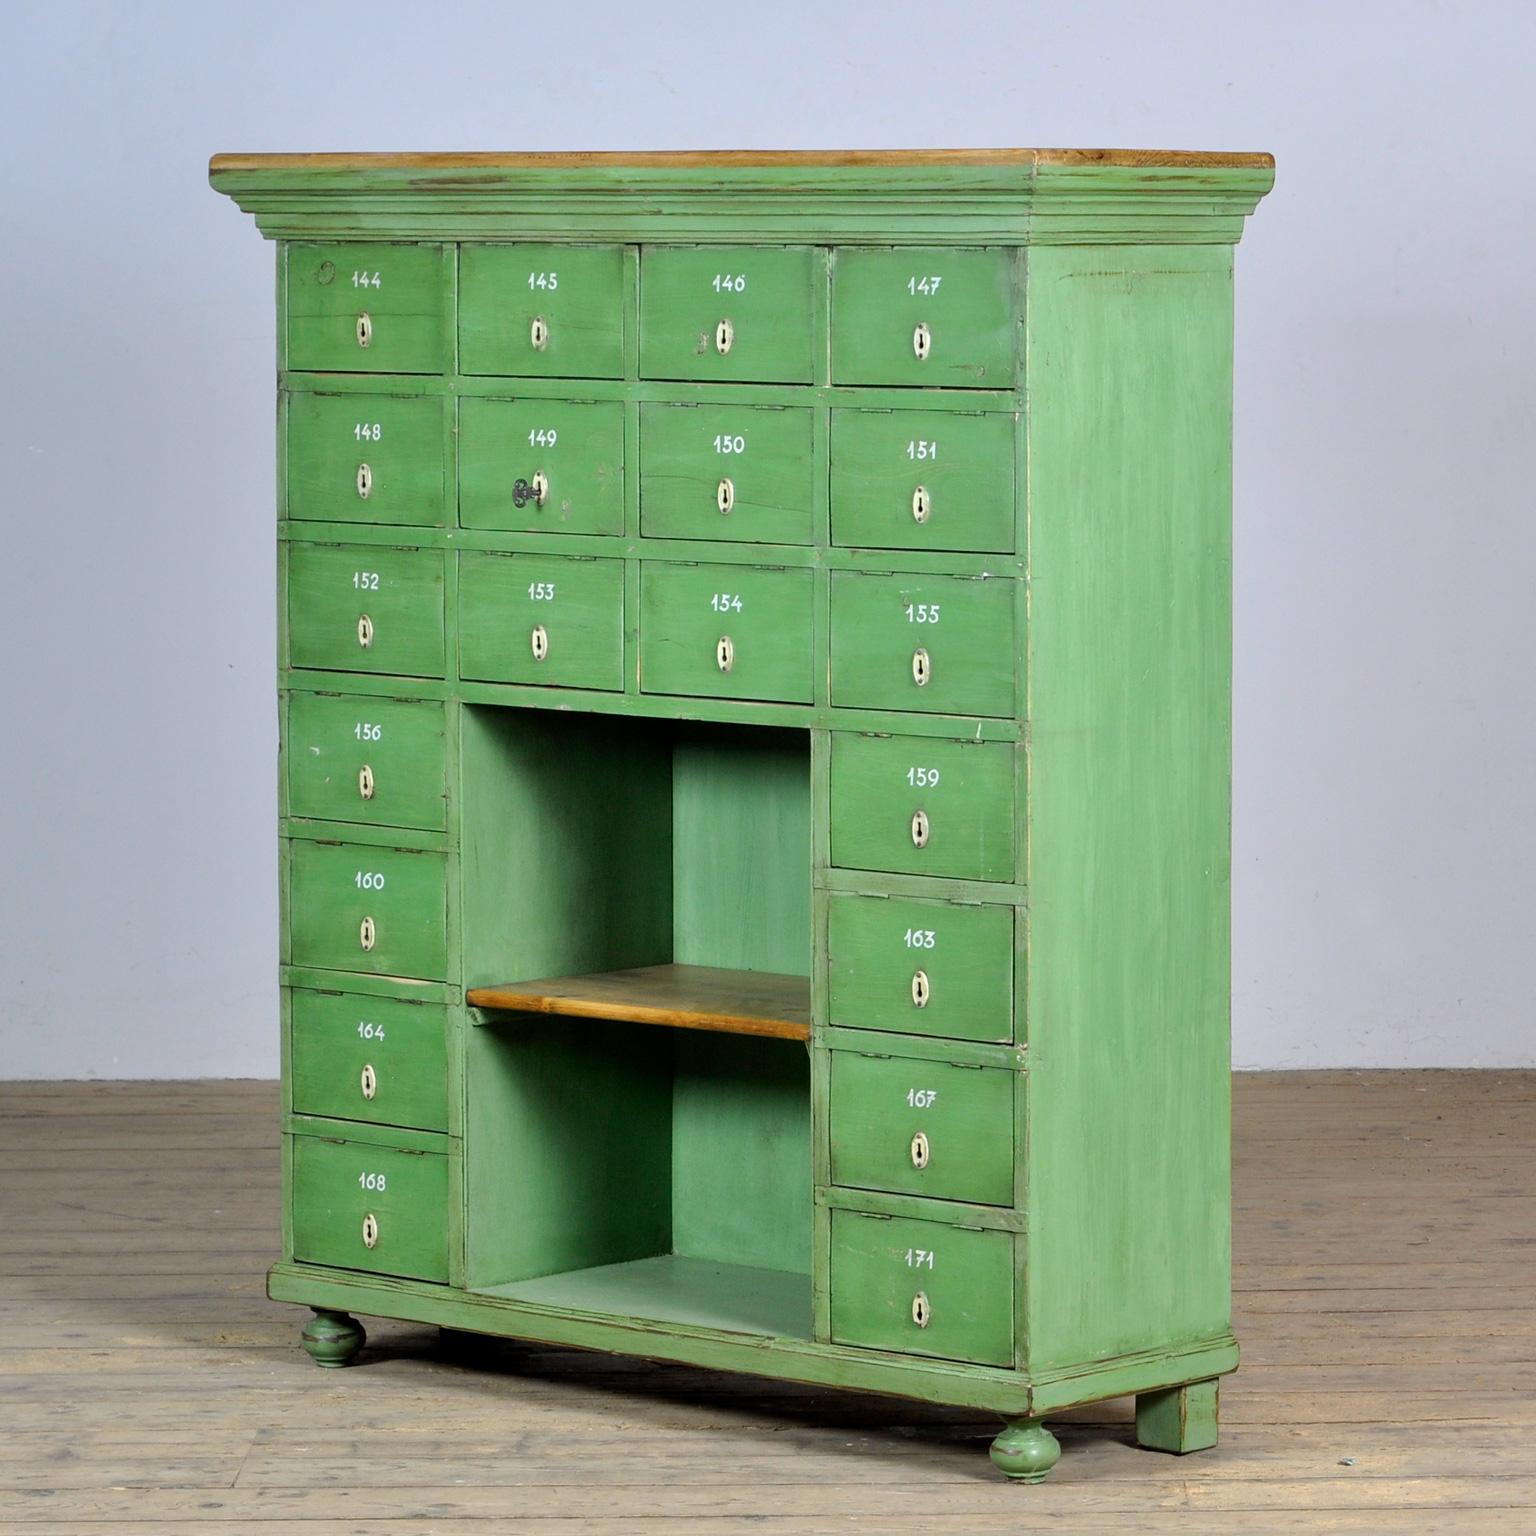 Hungarian Cabinet From A Postoffice, 1950's For Sale